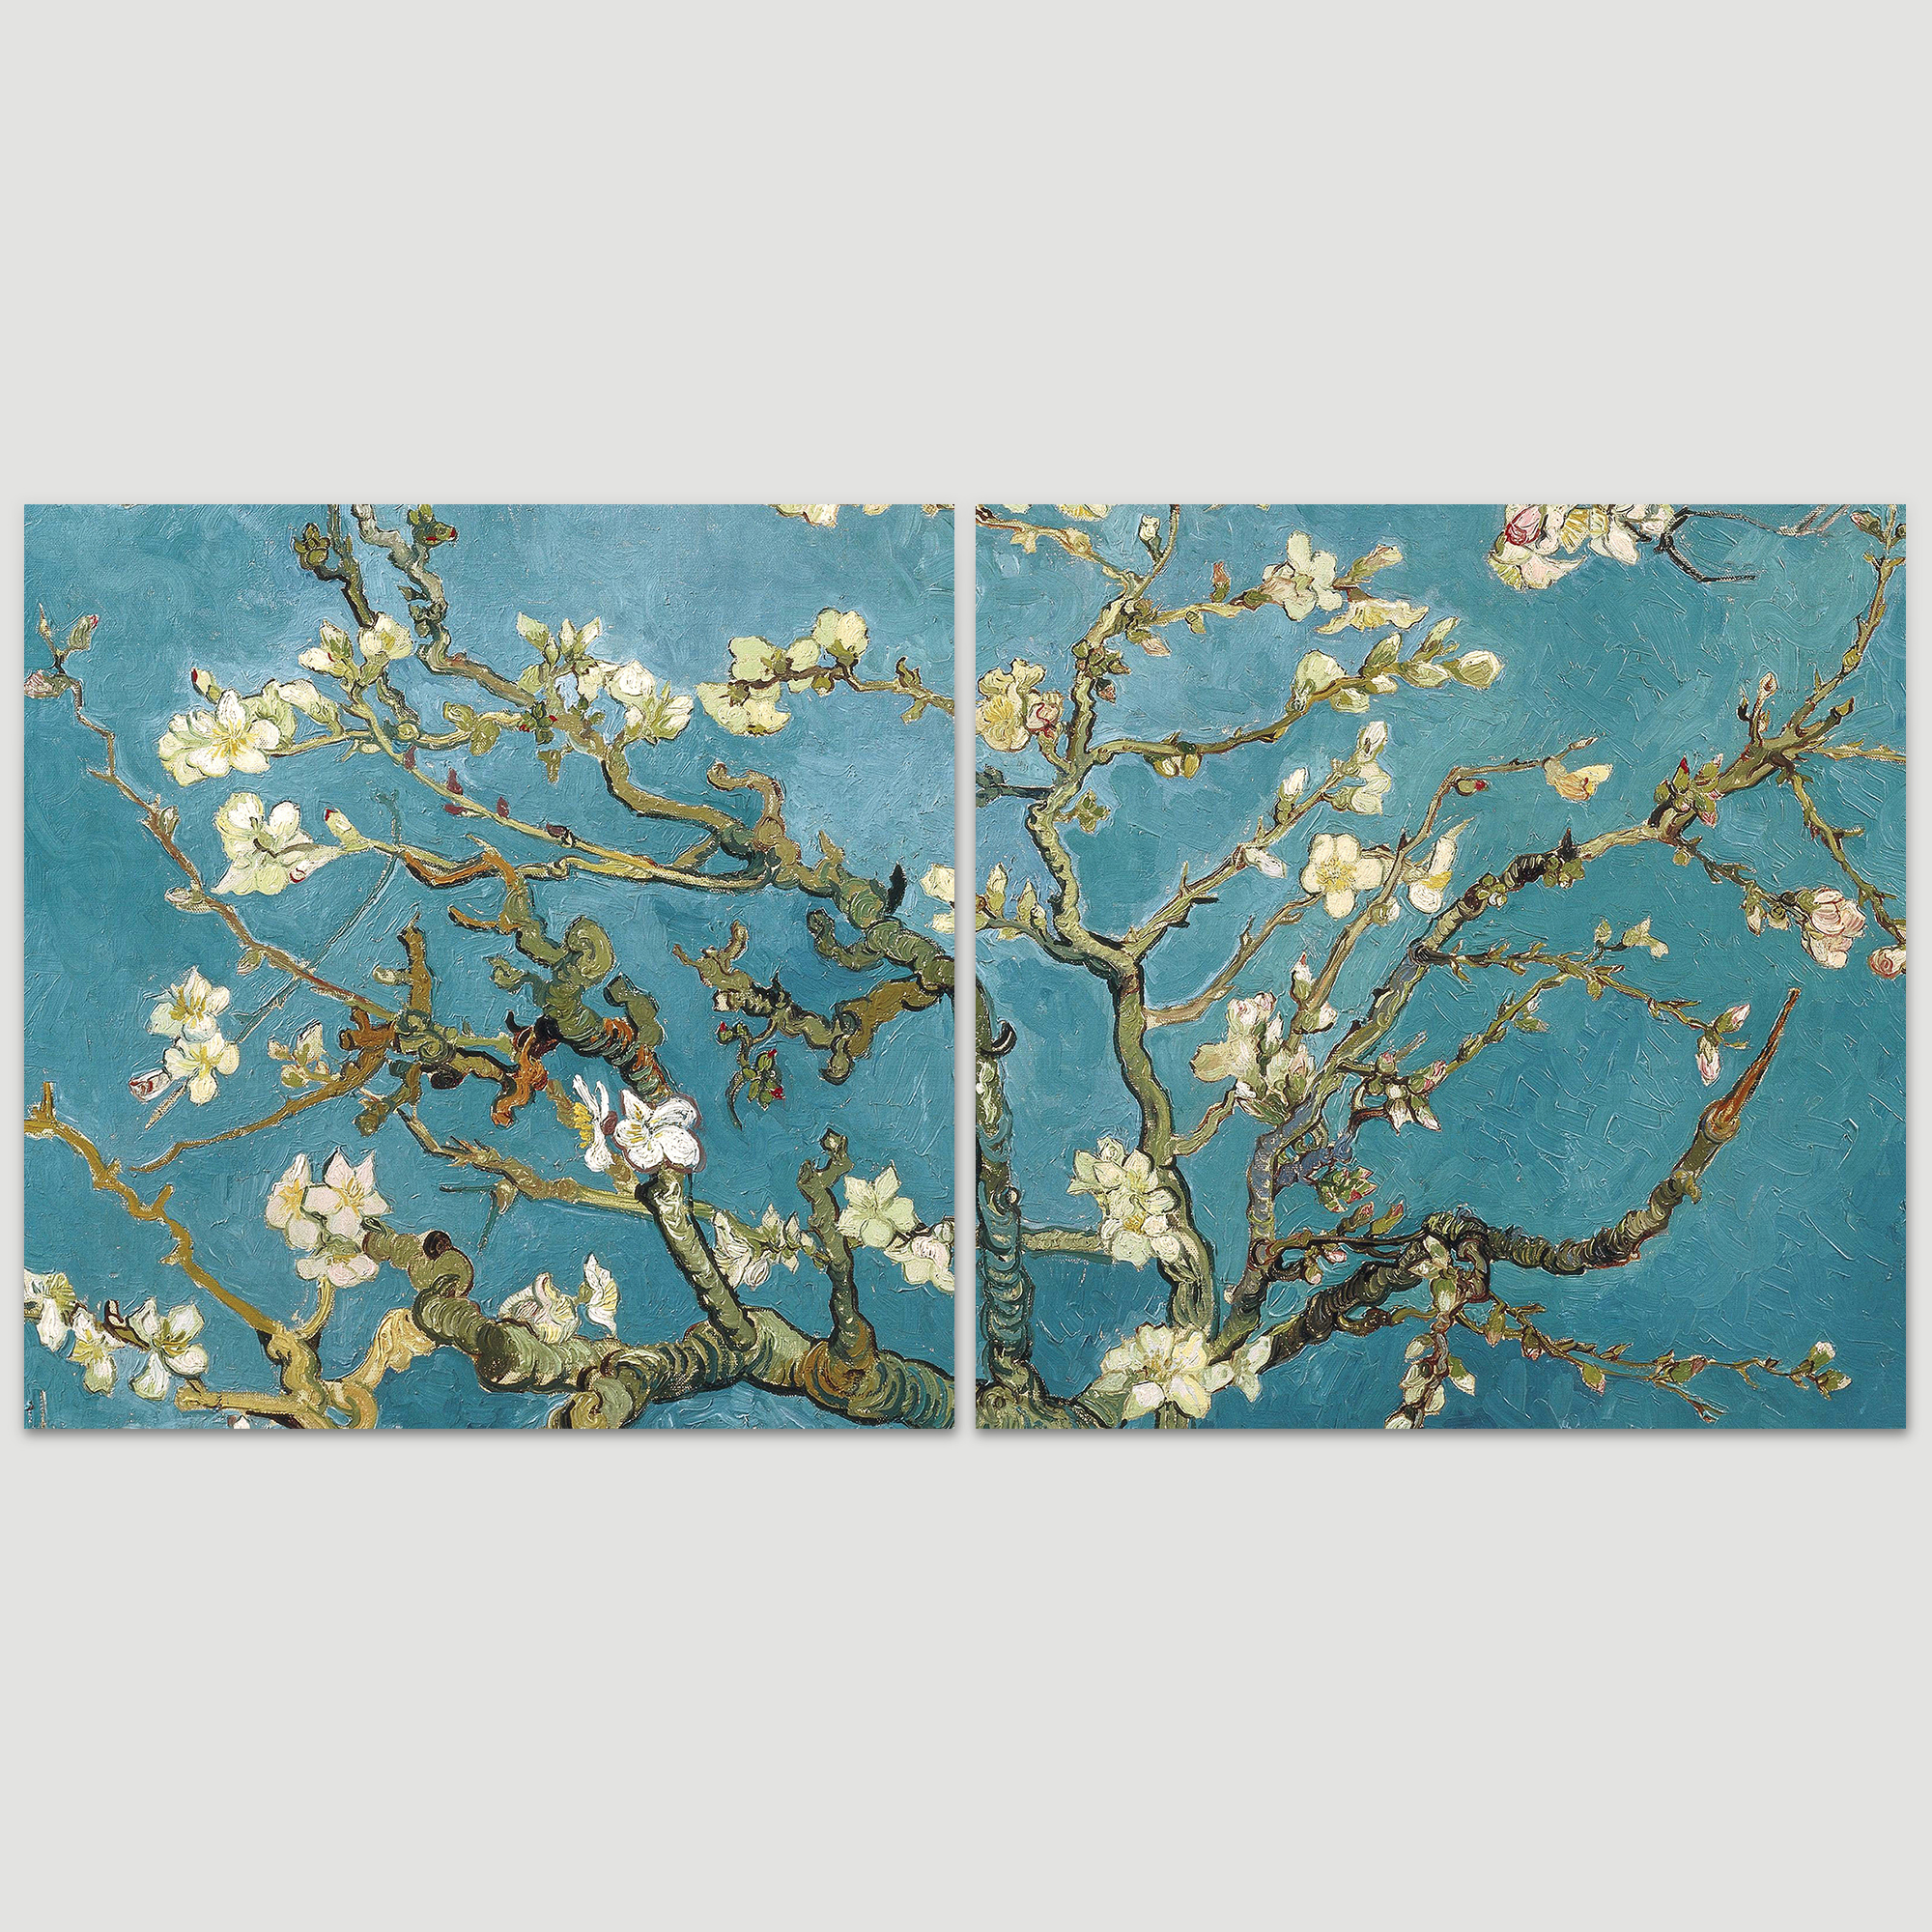 2 Panel Square Canvas Wall Art - Almond Blossom by Vincent Van Gogh - Giclee Print Gallery Wrap Modern Home Art Ready to Hang - 12